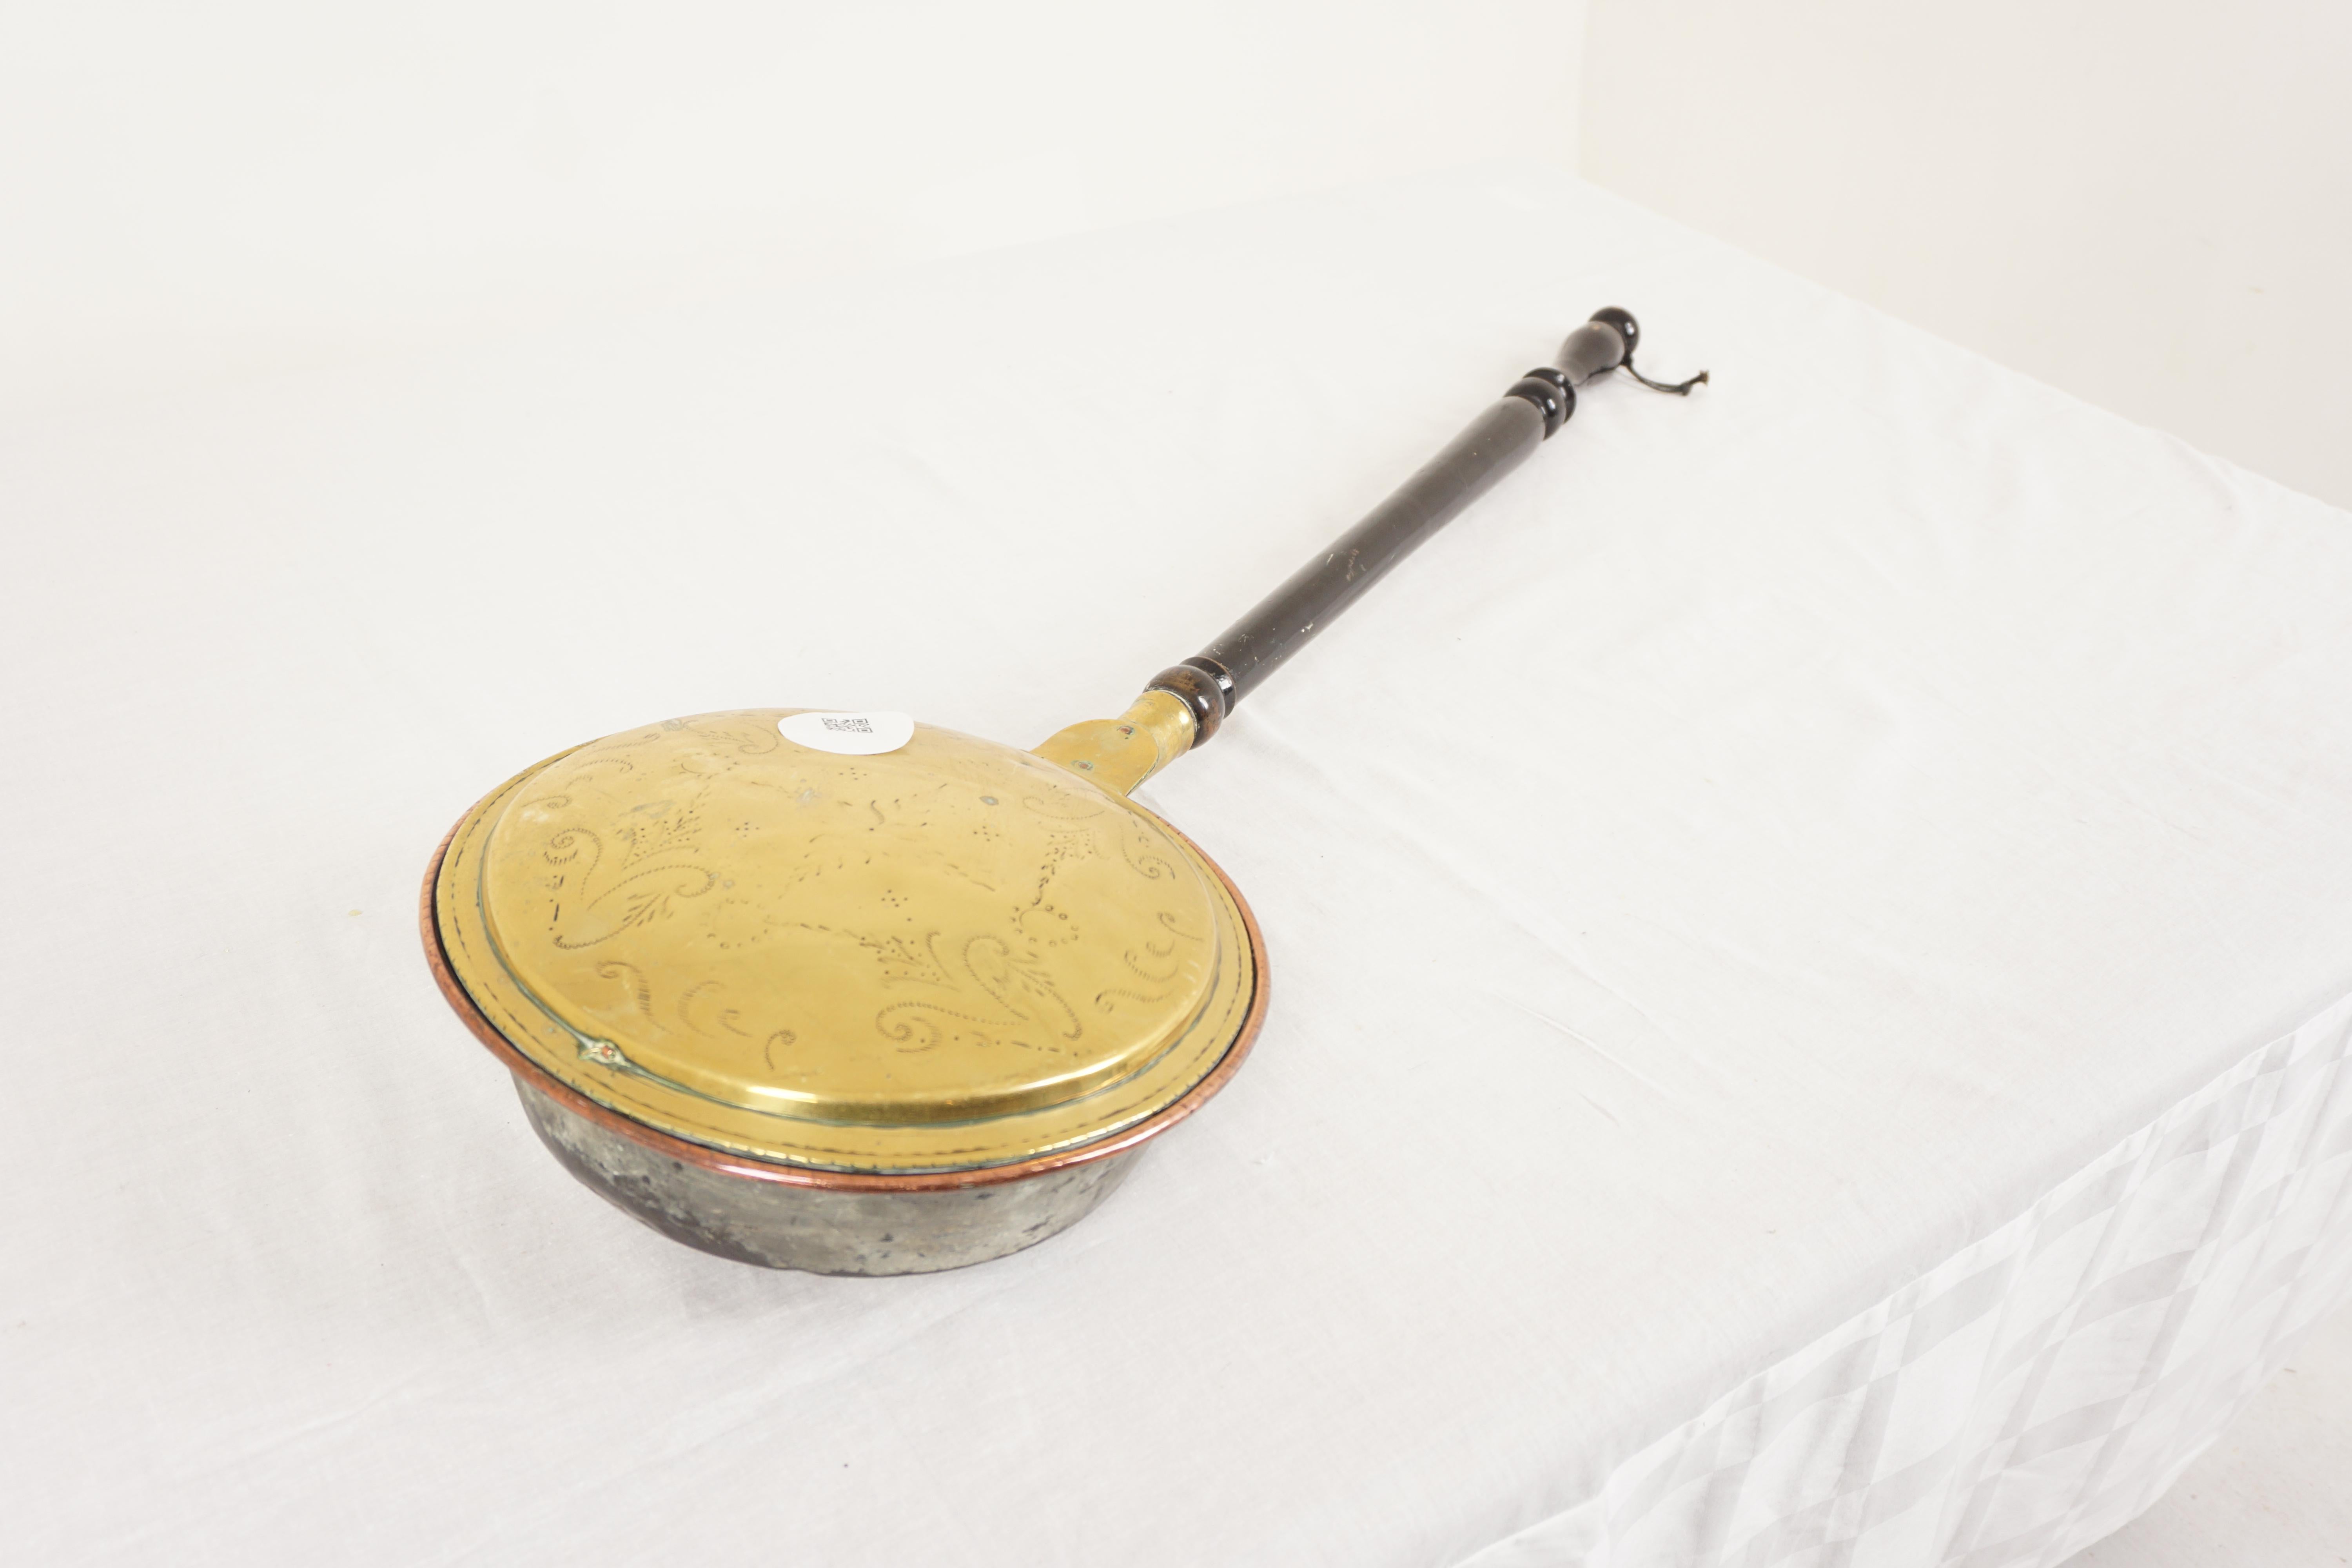 Antique Victorian brass bed warmer, bed pan, Scotland 1880, H1139

Scotland 1880
Solid Brass
Original Finish
Turned wooden handle
Embossed top brass lid opens to reveal interior which will hold warms coals
These were used to warm the inside